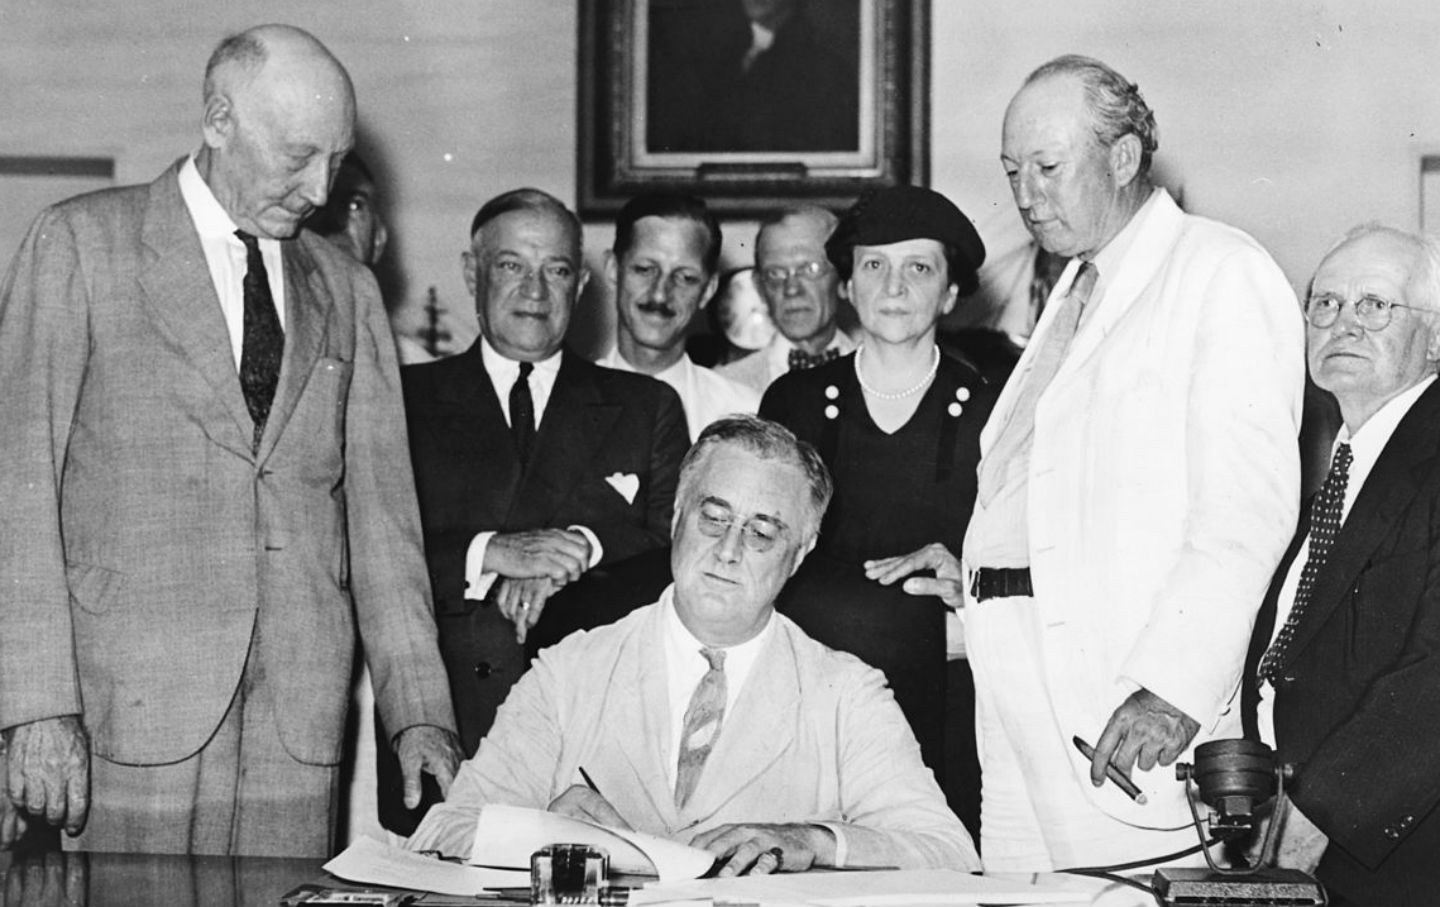 August 14, 1935: President Franklin Roosevelt Signs the Social Security Act